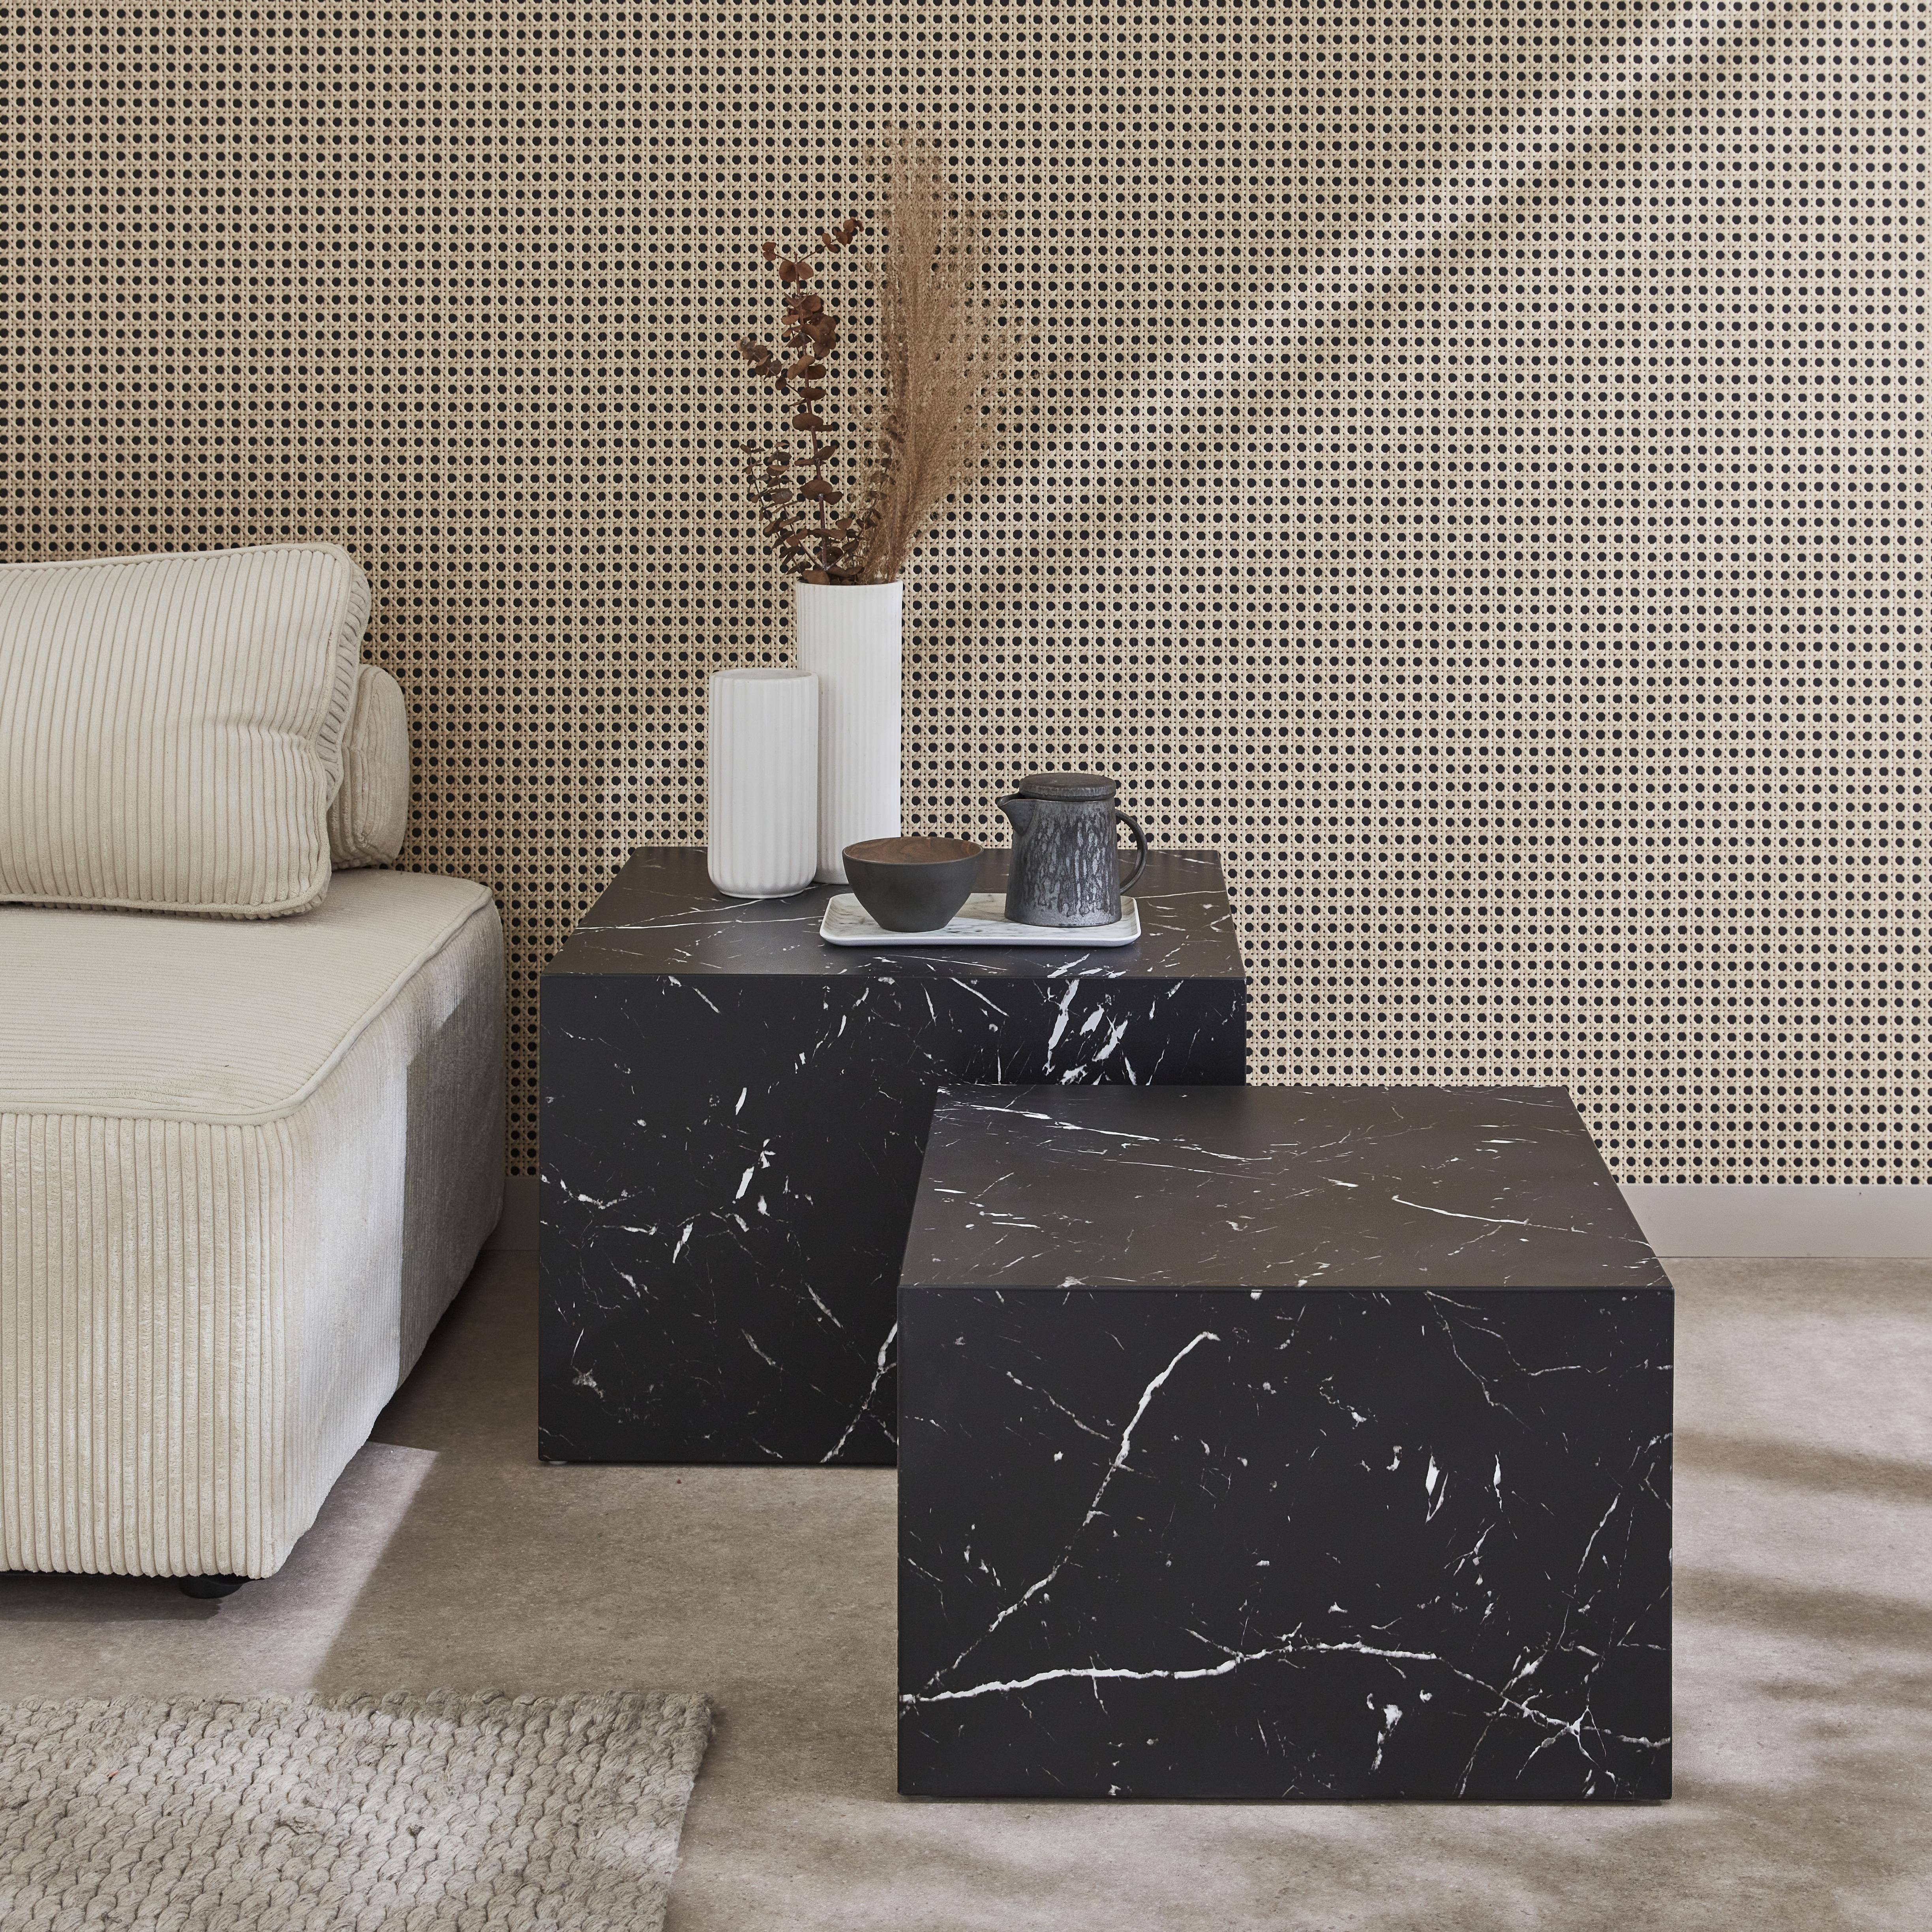 Set of 2 square coffee tables with marble effect, black, L50xW50xH33cm &  L58xW58xH40cm, Paros Photo1